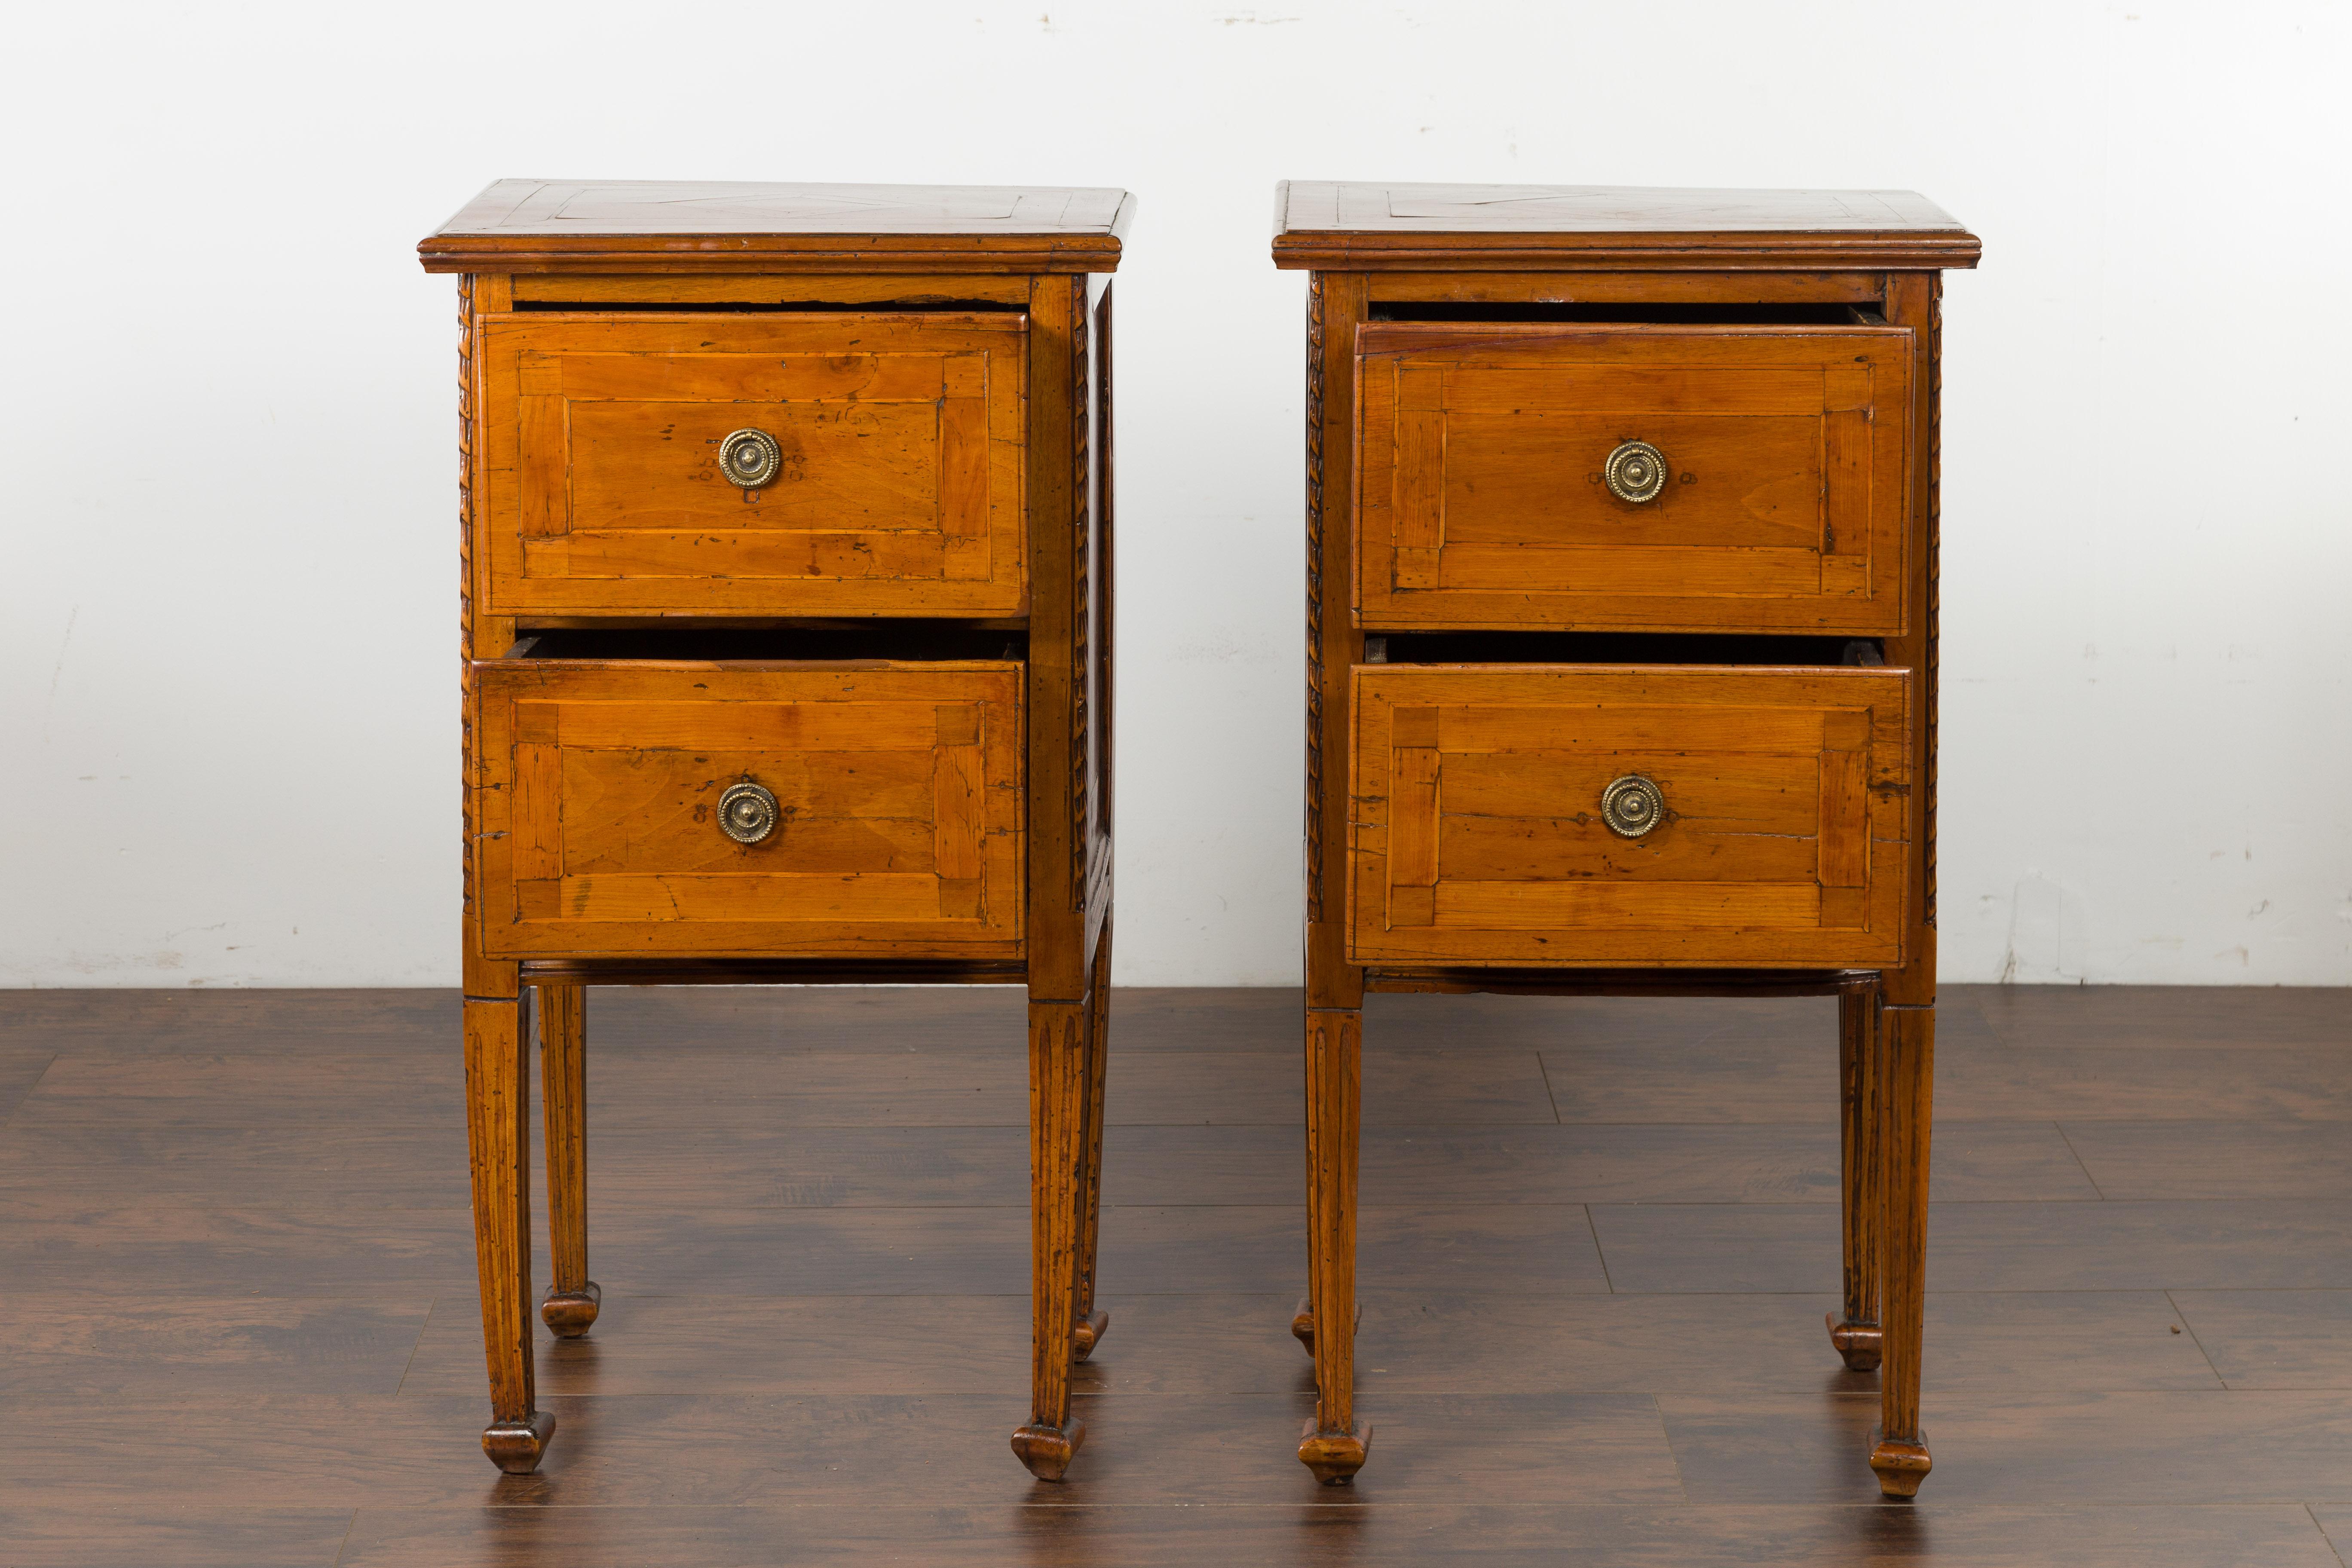 Pair of Italian 1820s Neoclassical Period Walnut Bedside Tables with Two Drawers For Sale 10